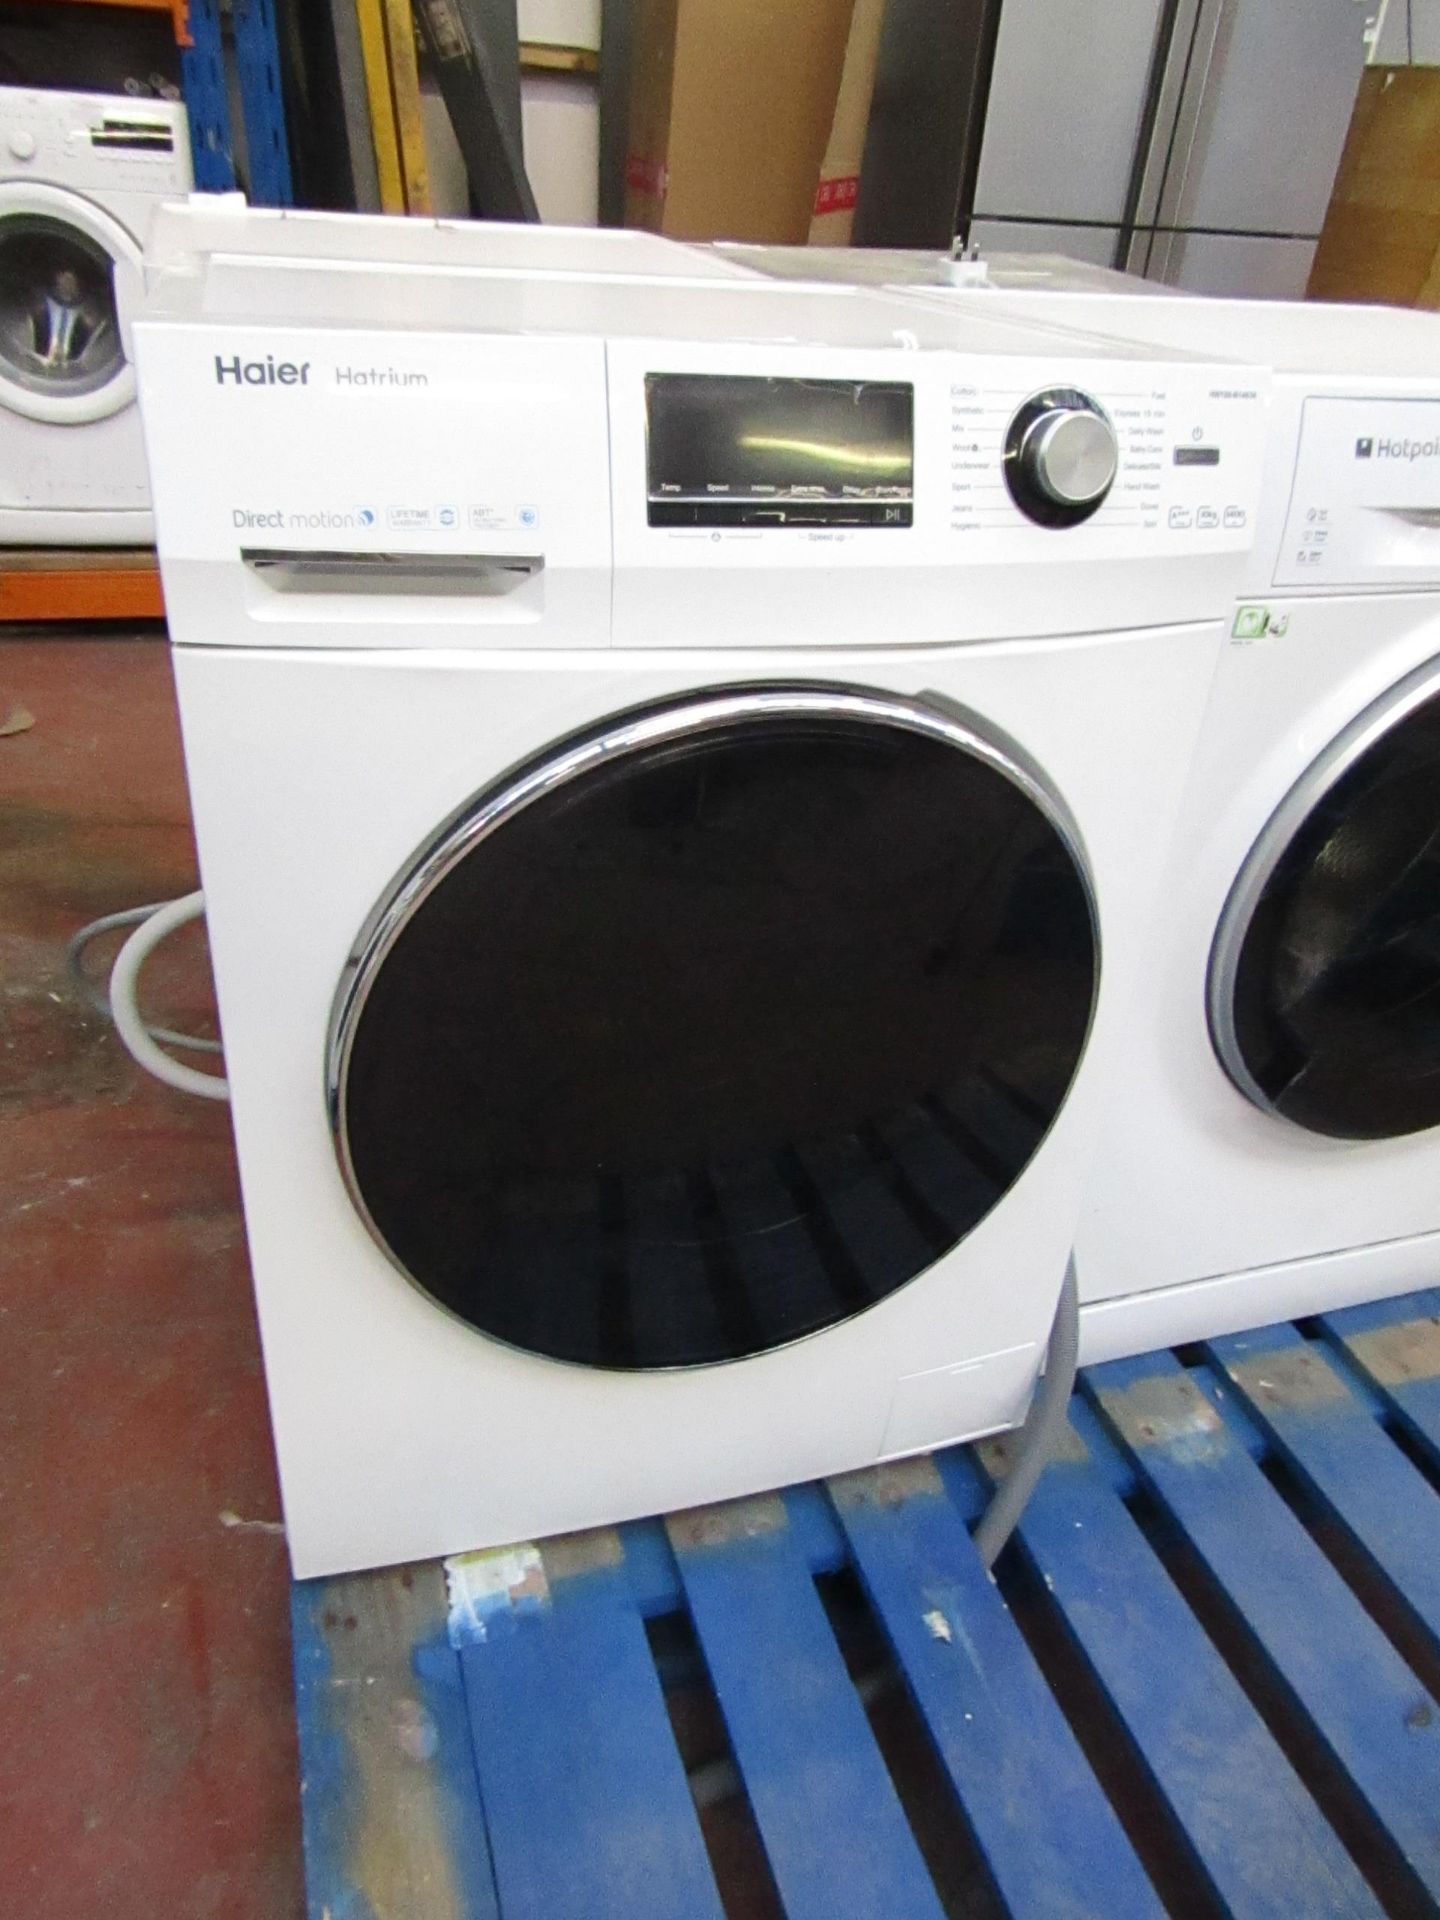 Haier Haltys Direct Motion 10Kg washing machine - Powers on, But not Spinning.